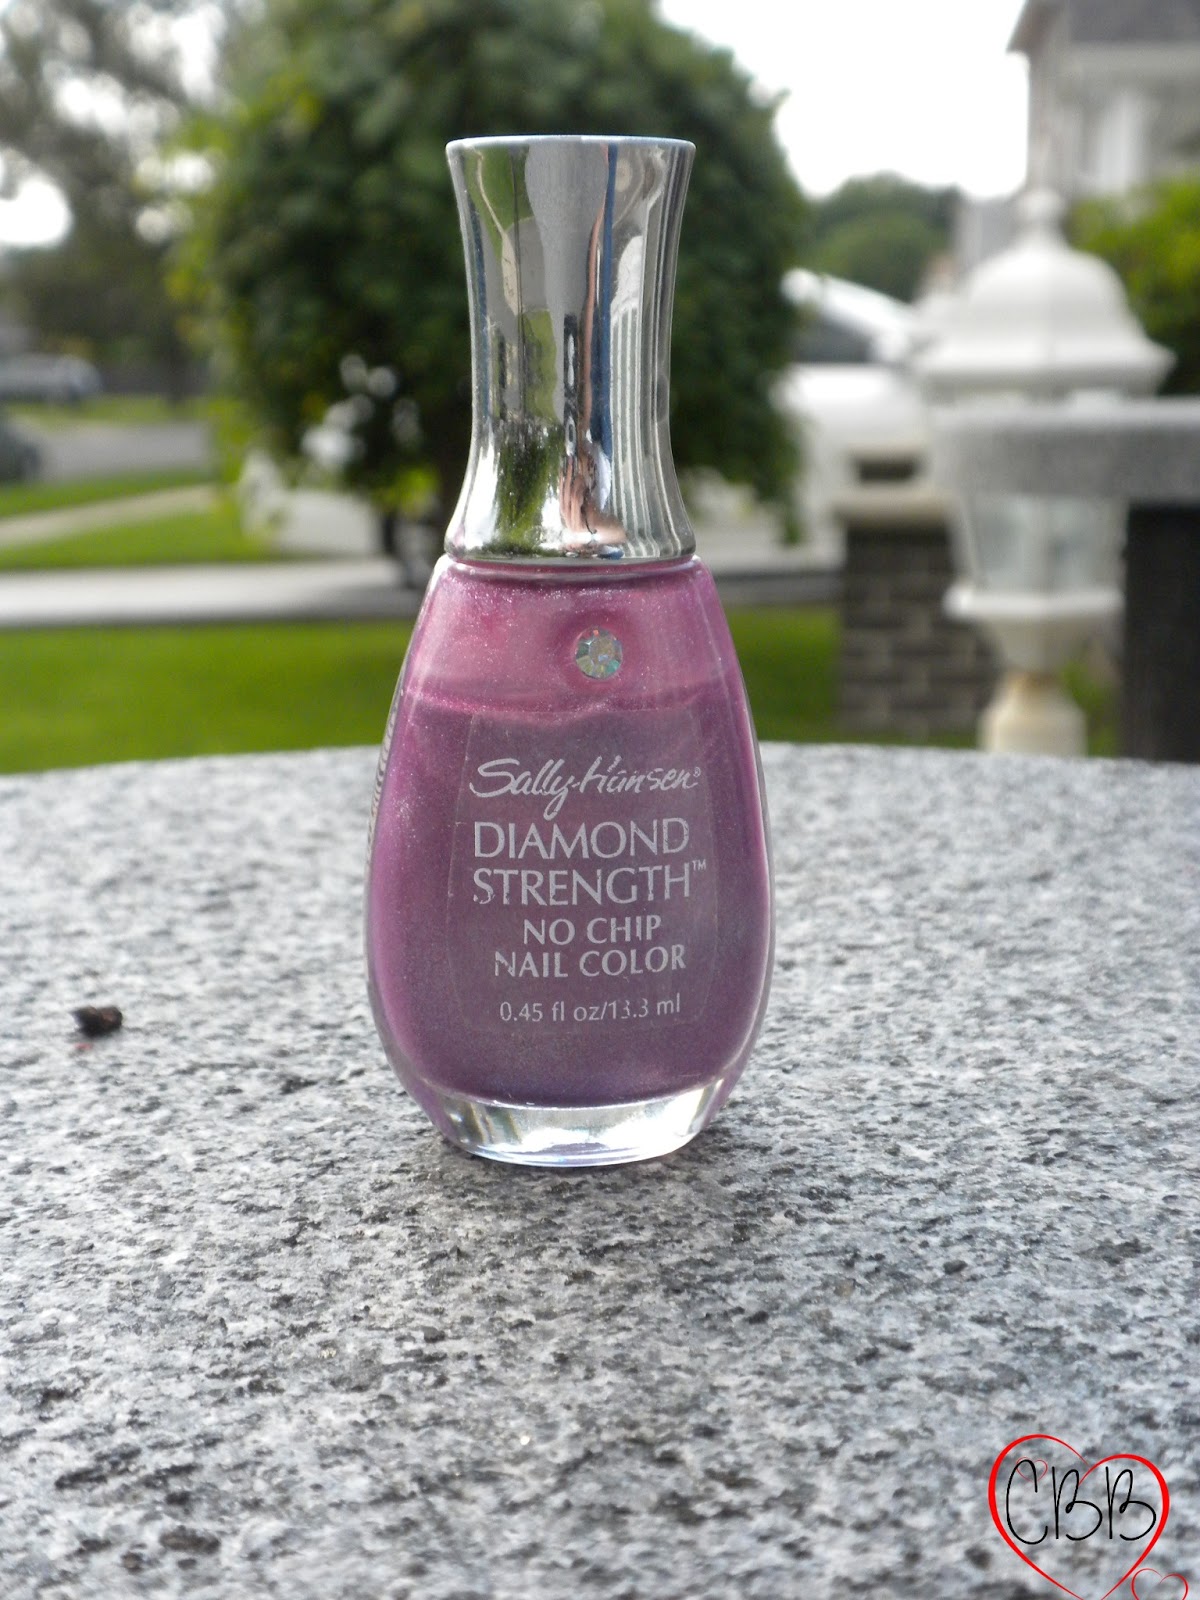 Sammi the Beauty Buff: Review: Sally Hansen Diamond Strength Nail Color in  Forever Lilac